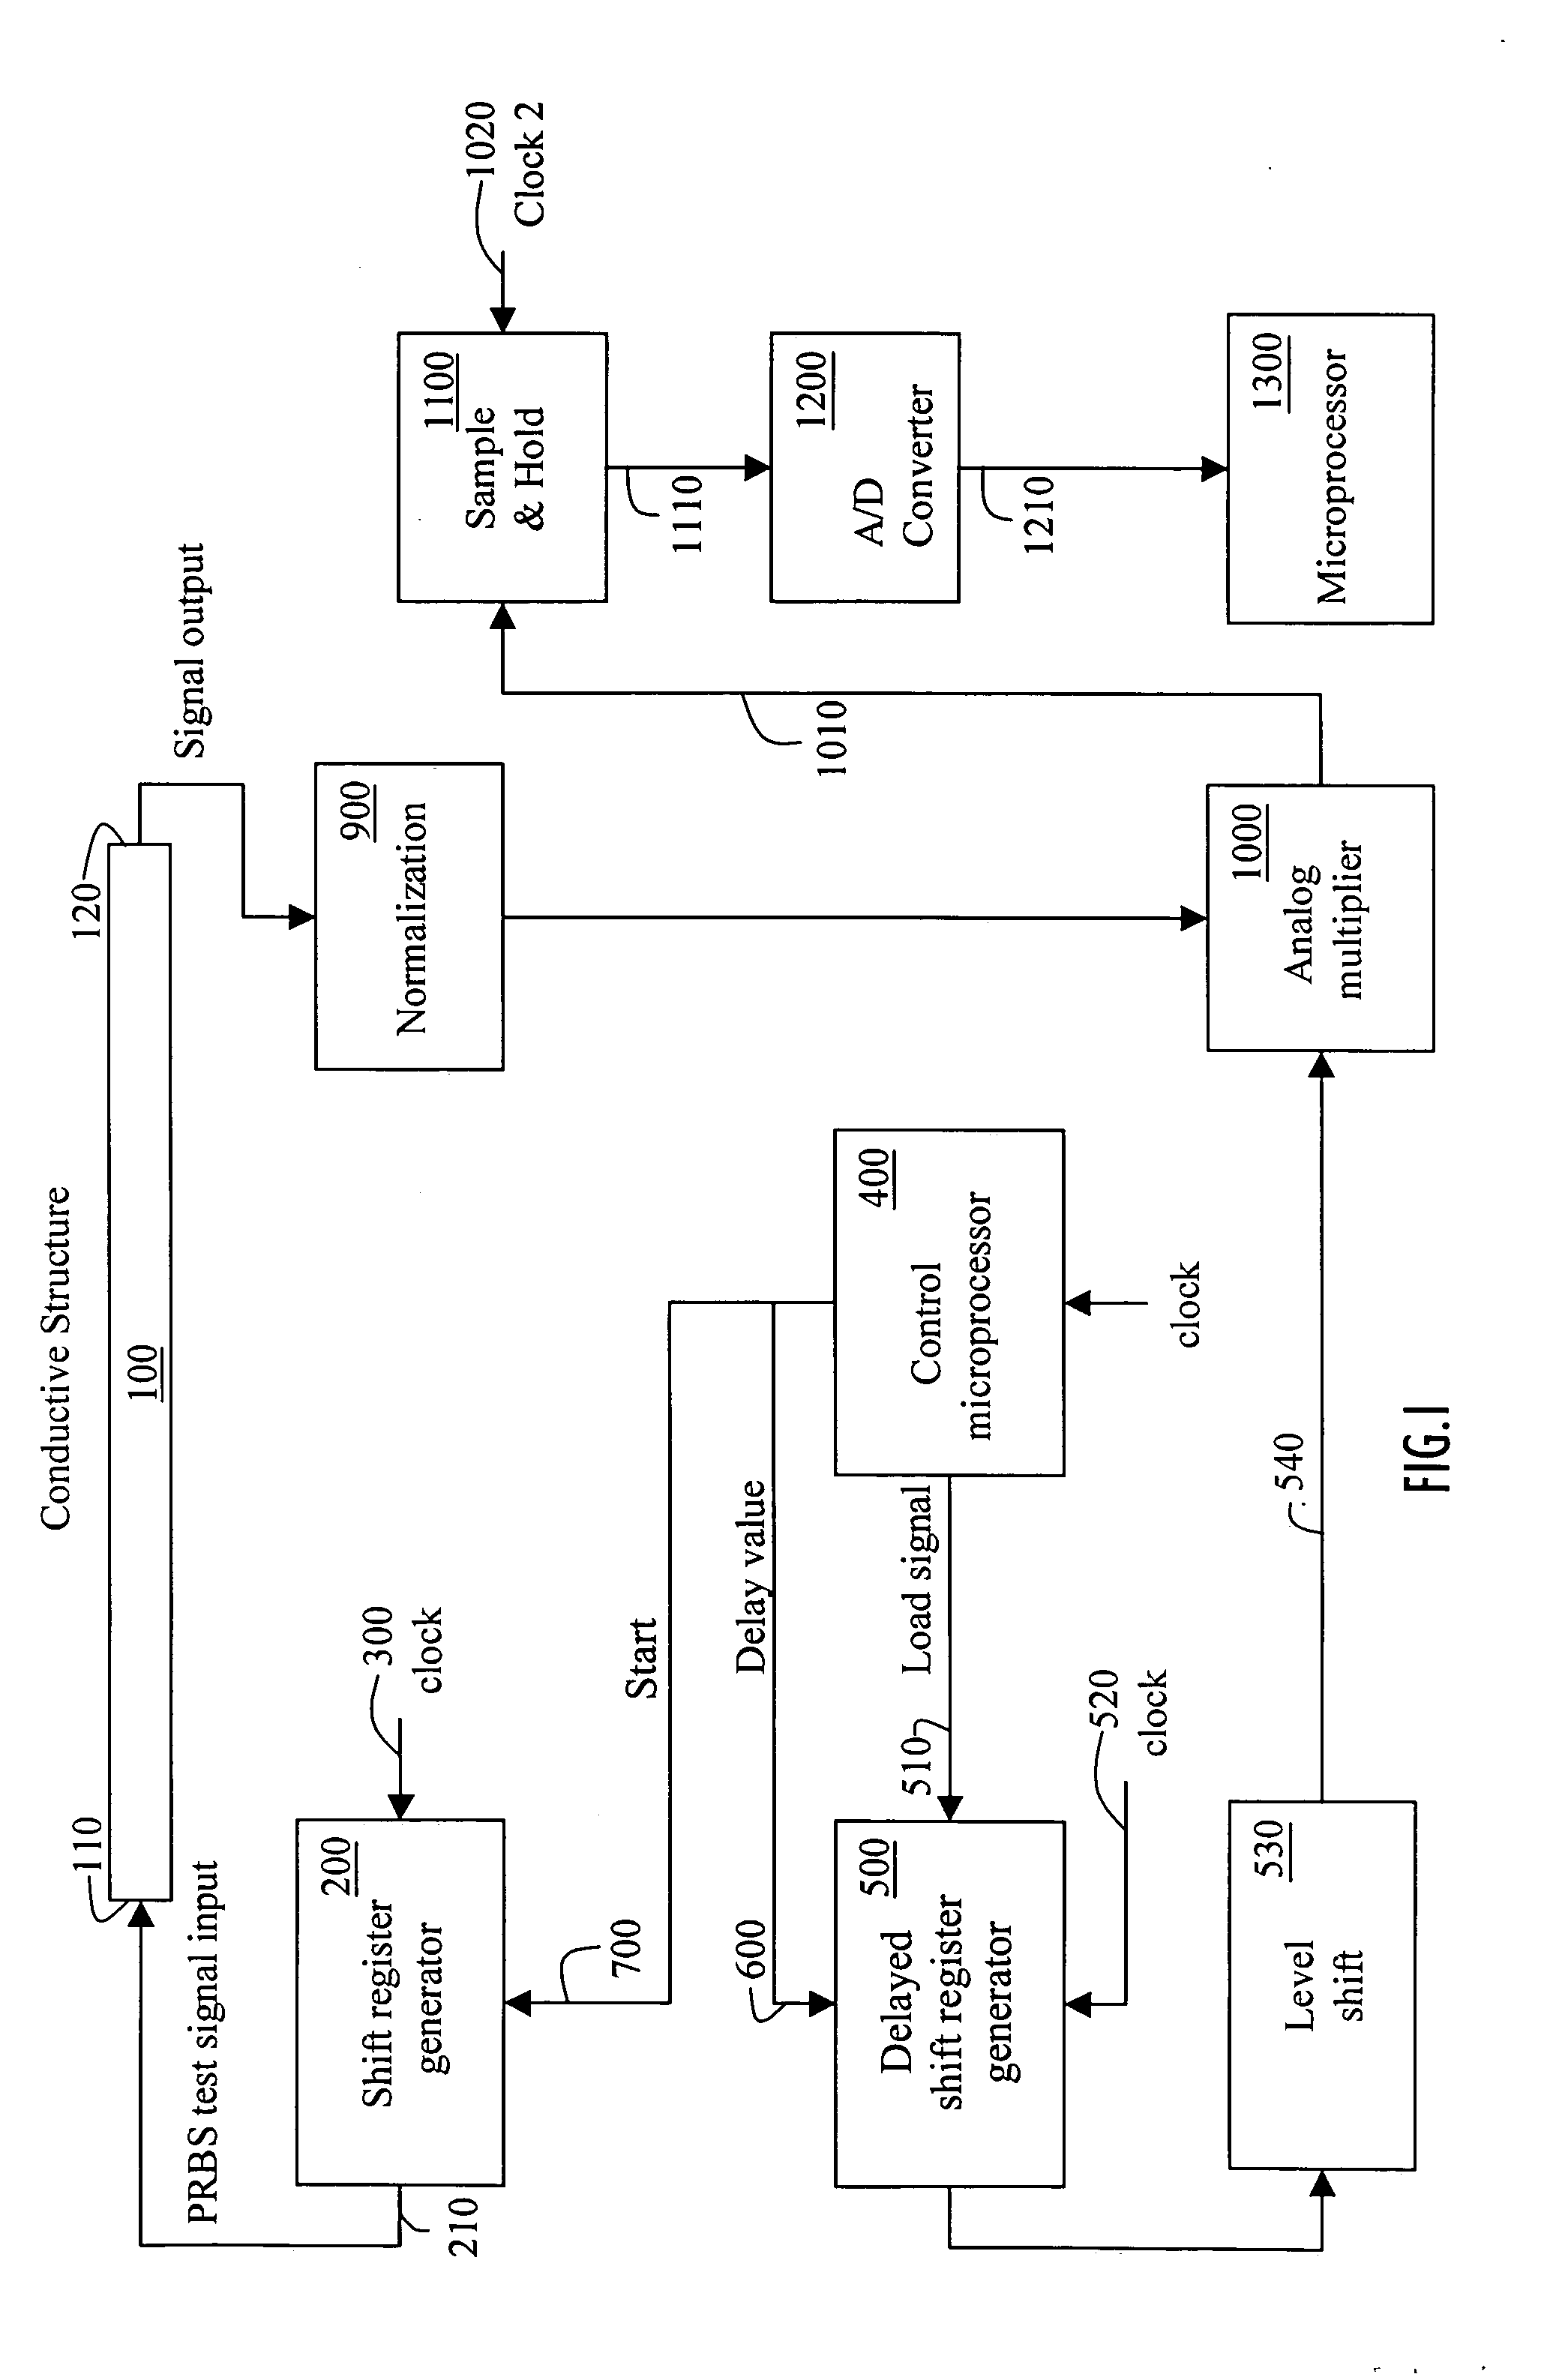 Method and system for non-destructive evaluation of conducting structures